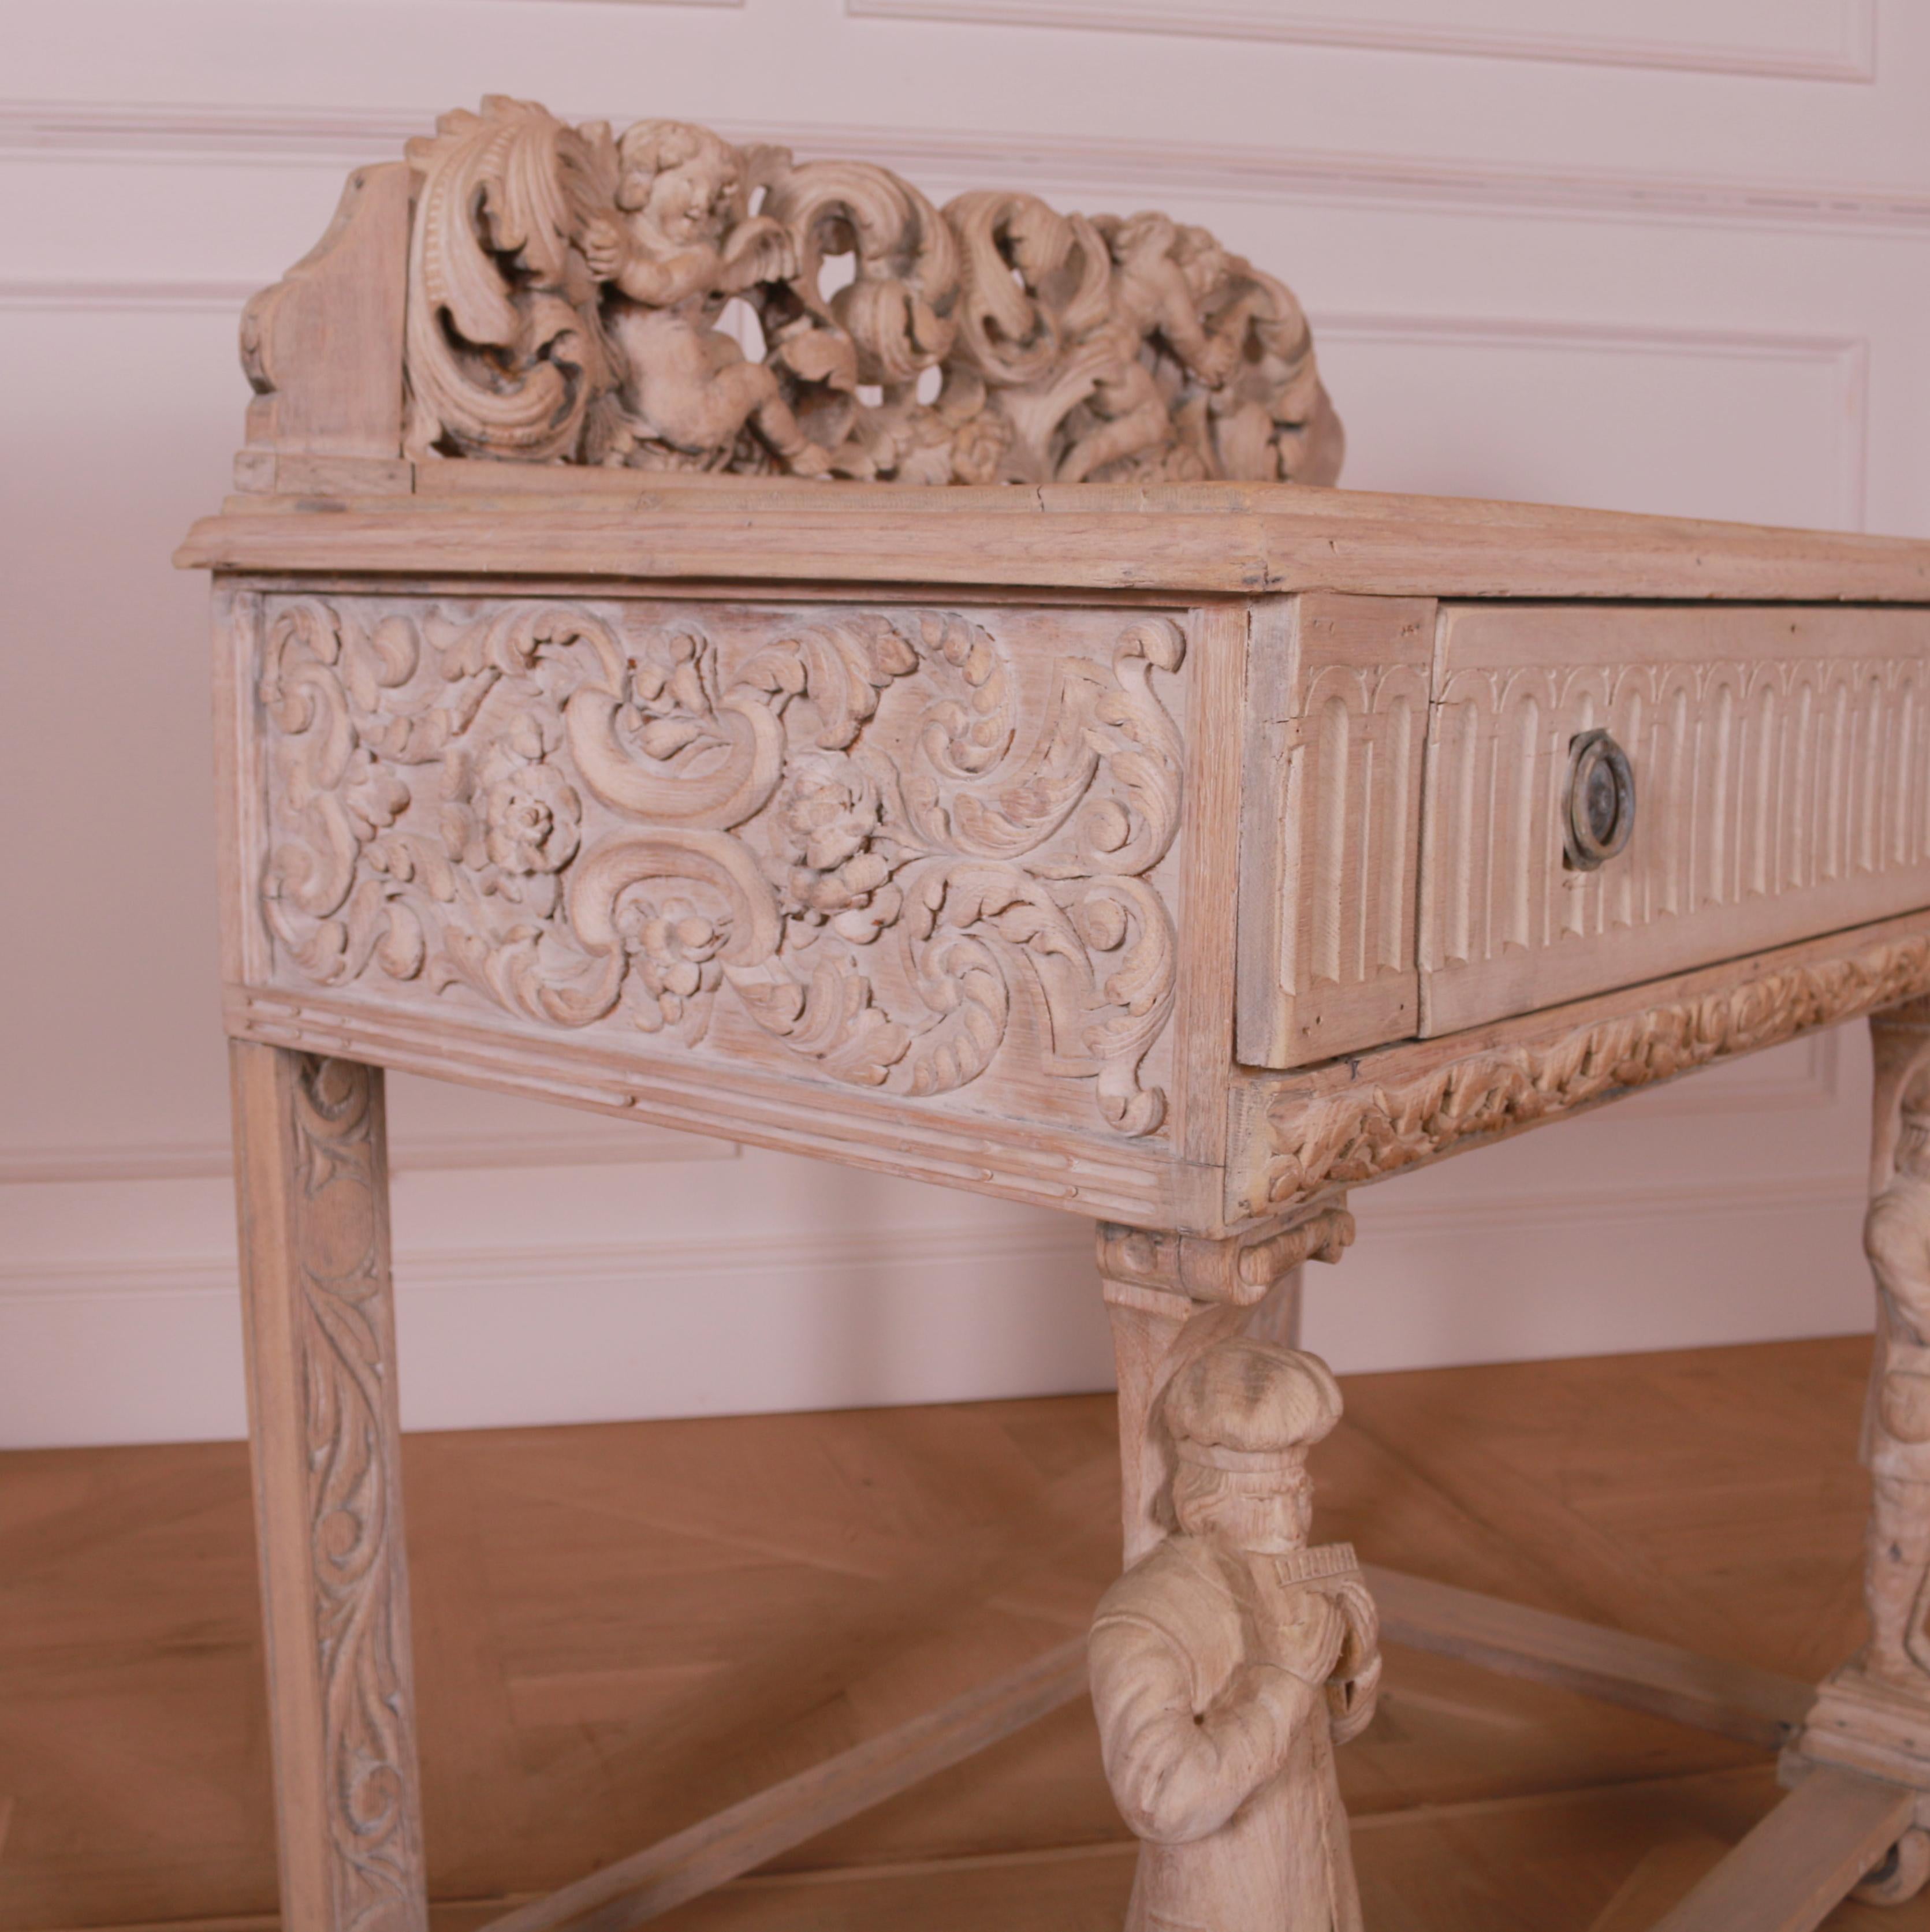 Early 19th C Northern European bleached oak carved one drawer side table. 1830.

Height to worktop is 31